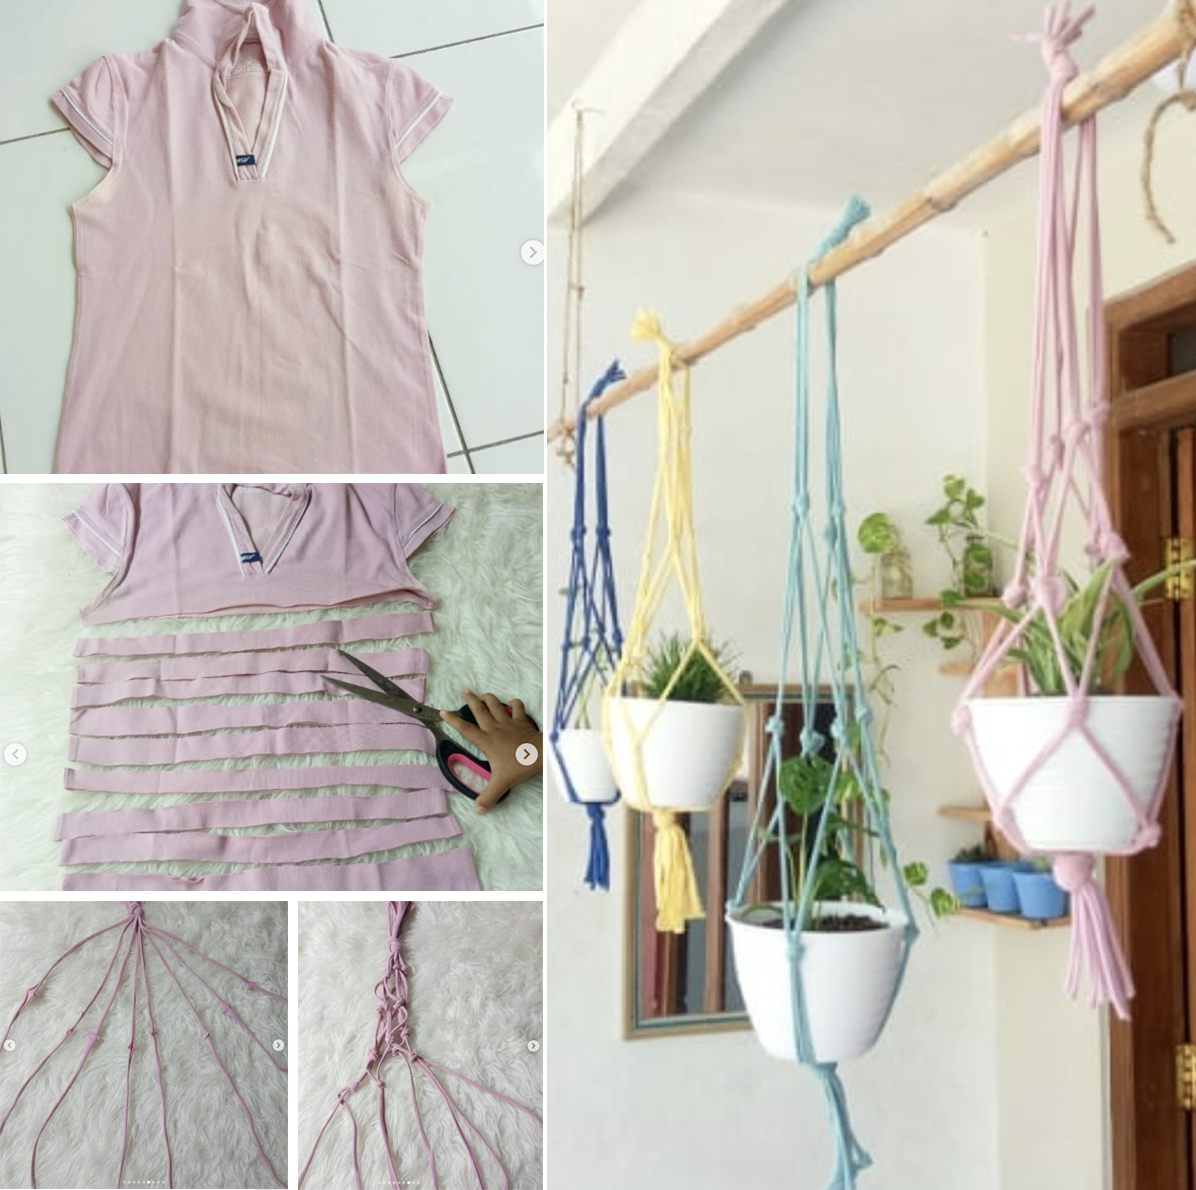 What to do With Old Clothes: 9 of the Best Ideas for Used Clothes